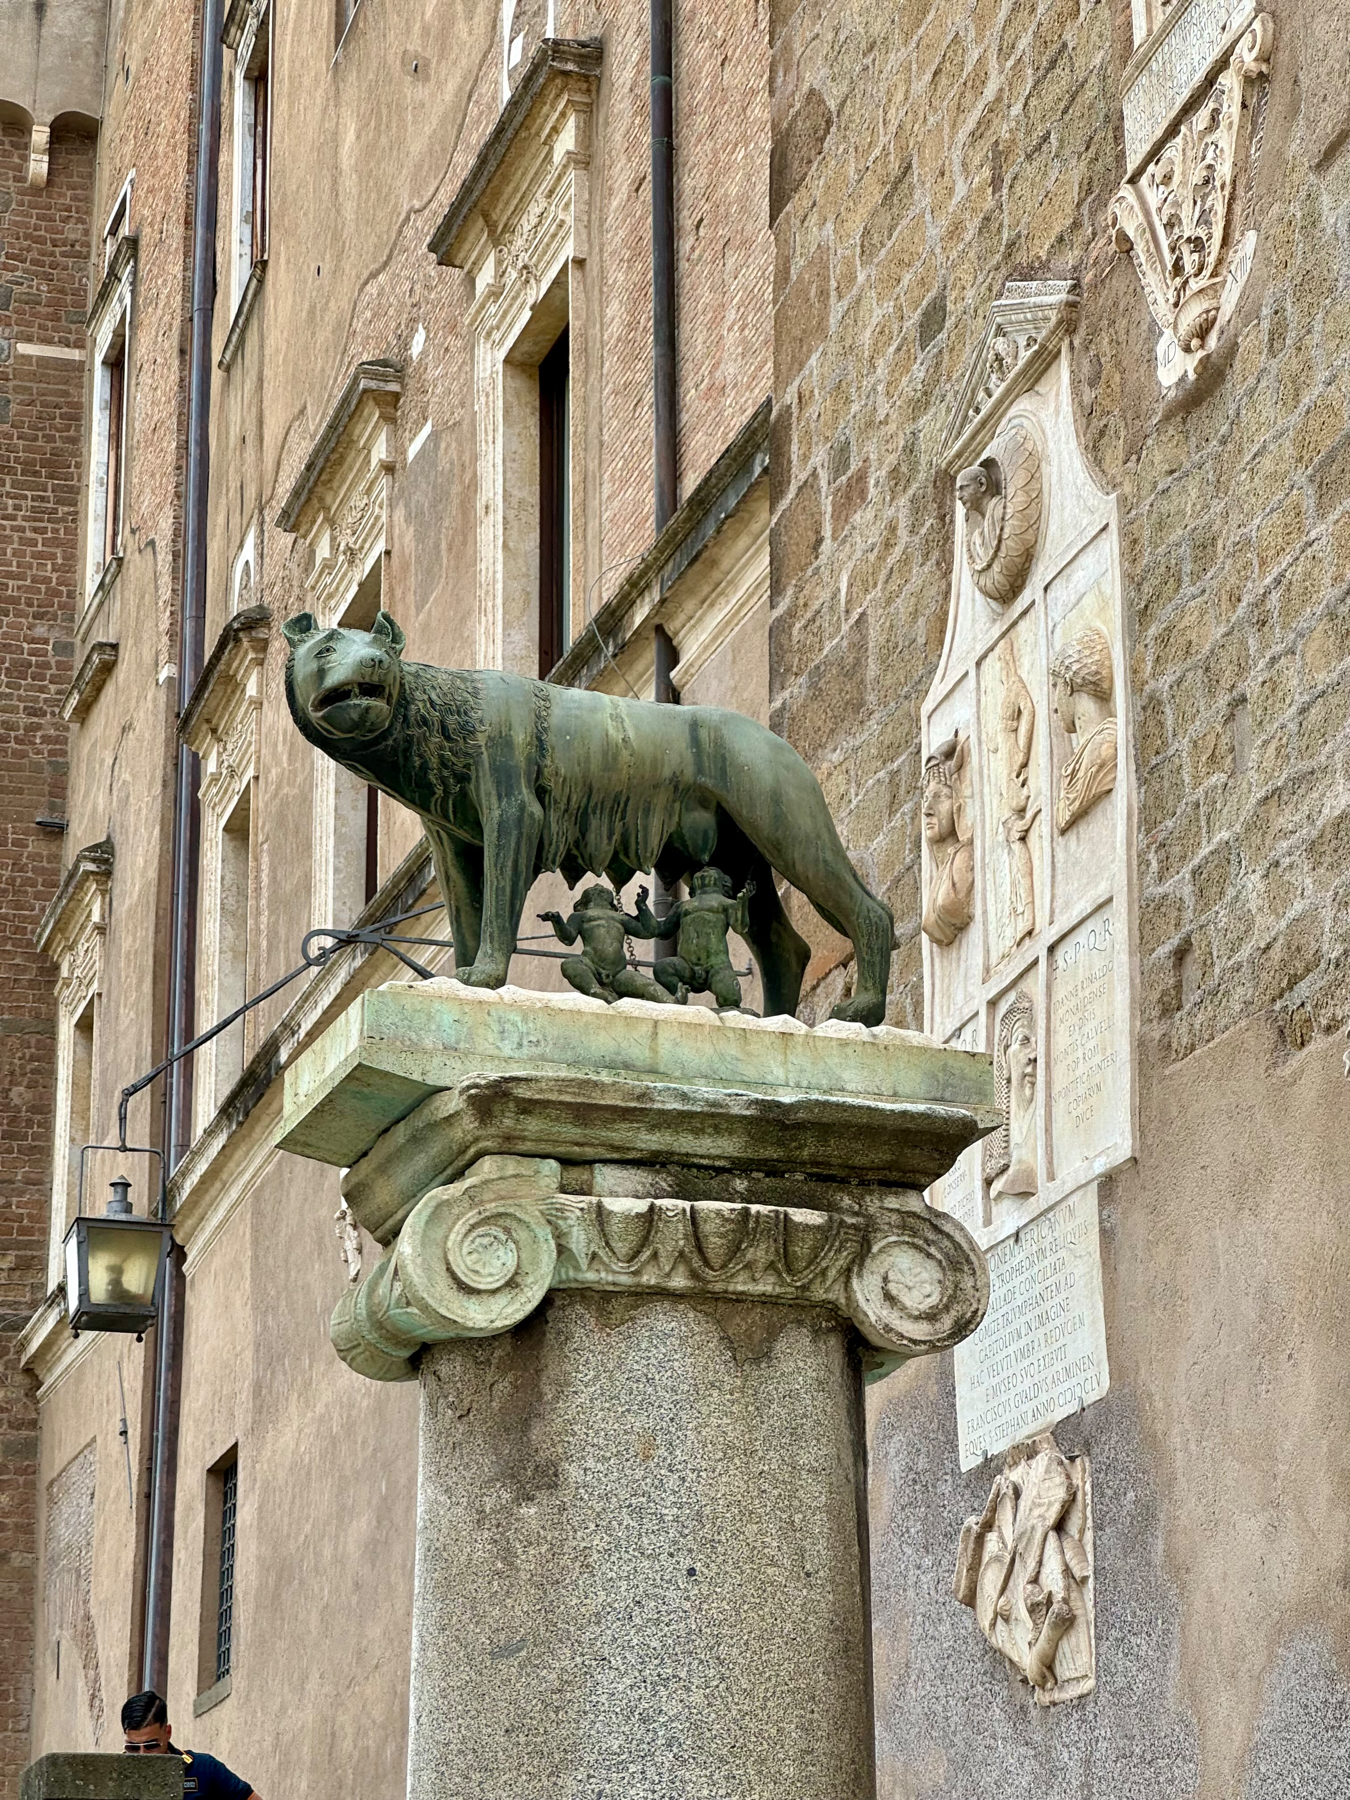 A statue of the Capitoline Wolf suckling Romulus and Remus is mounted on an ornate column in front of an old building with stone and brick walls. The background features sculpted plaques and architectural details. The scene is situated in an outdoor urban setting.